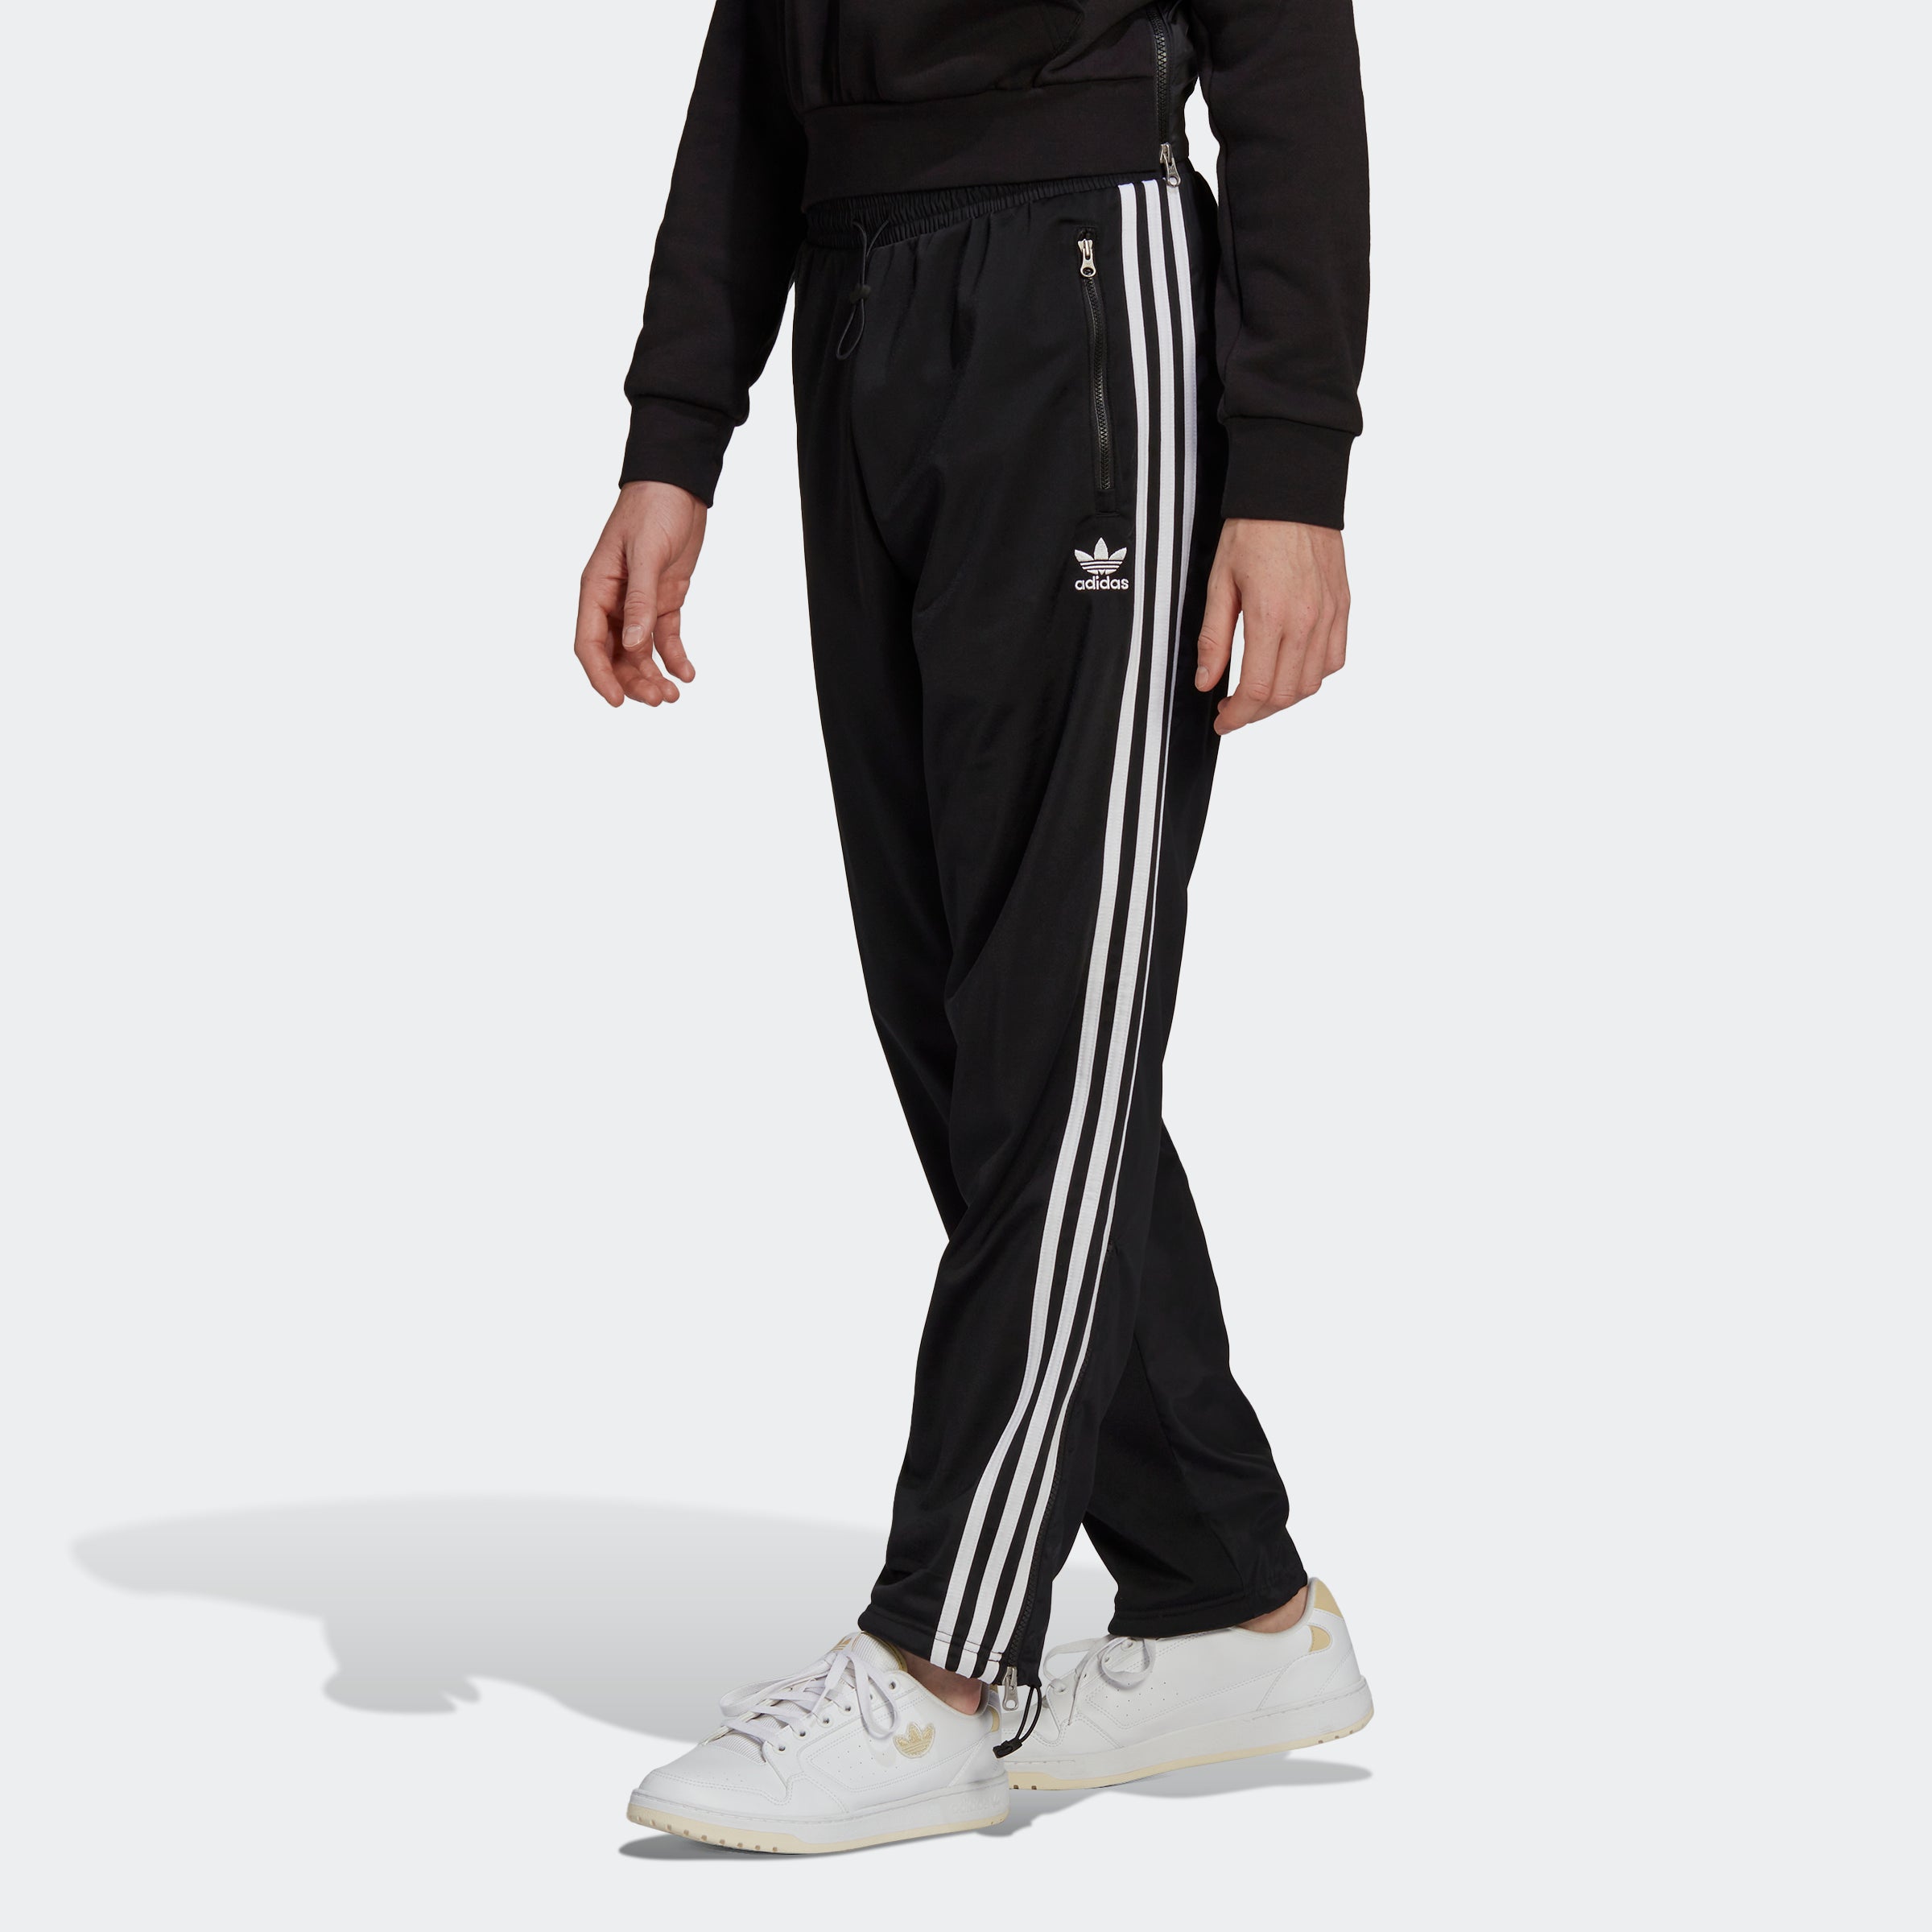 adidas Originals three stripe track pants in black | ASOS | Adidas pants  outfit, Pants outfit men, Adidas outfit